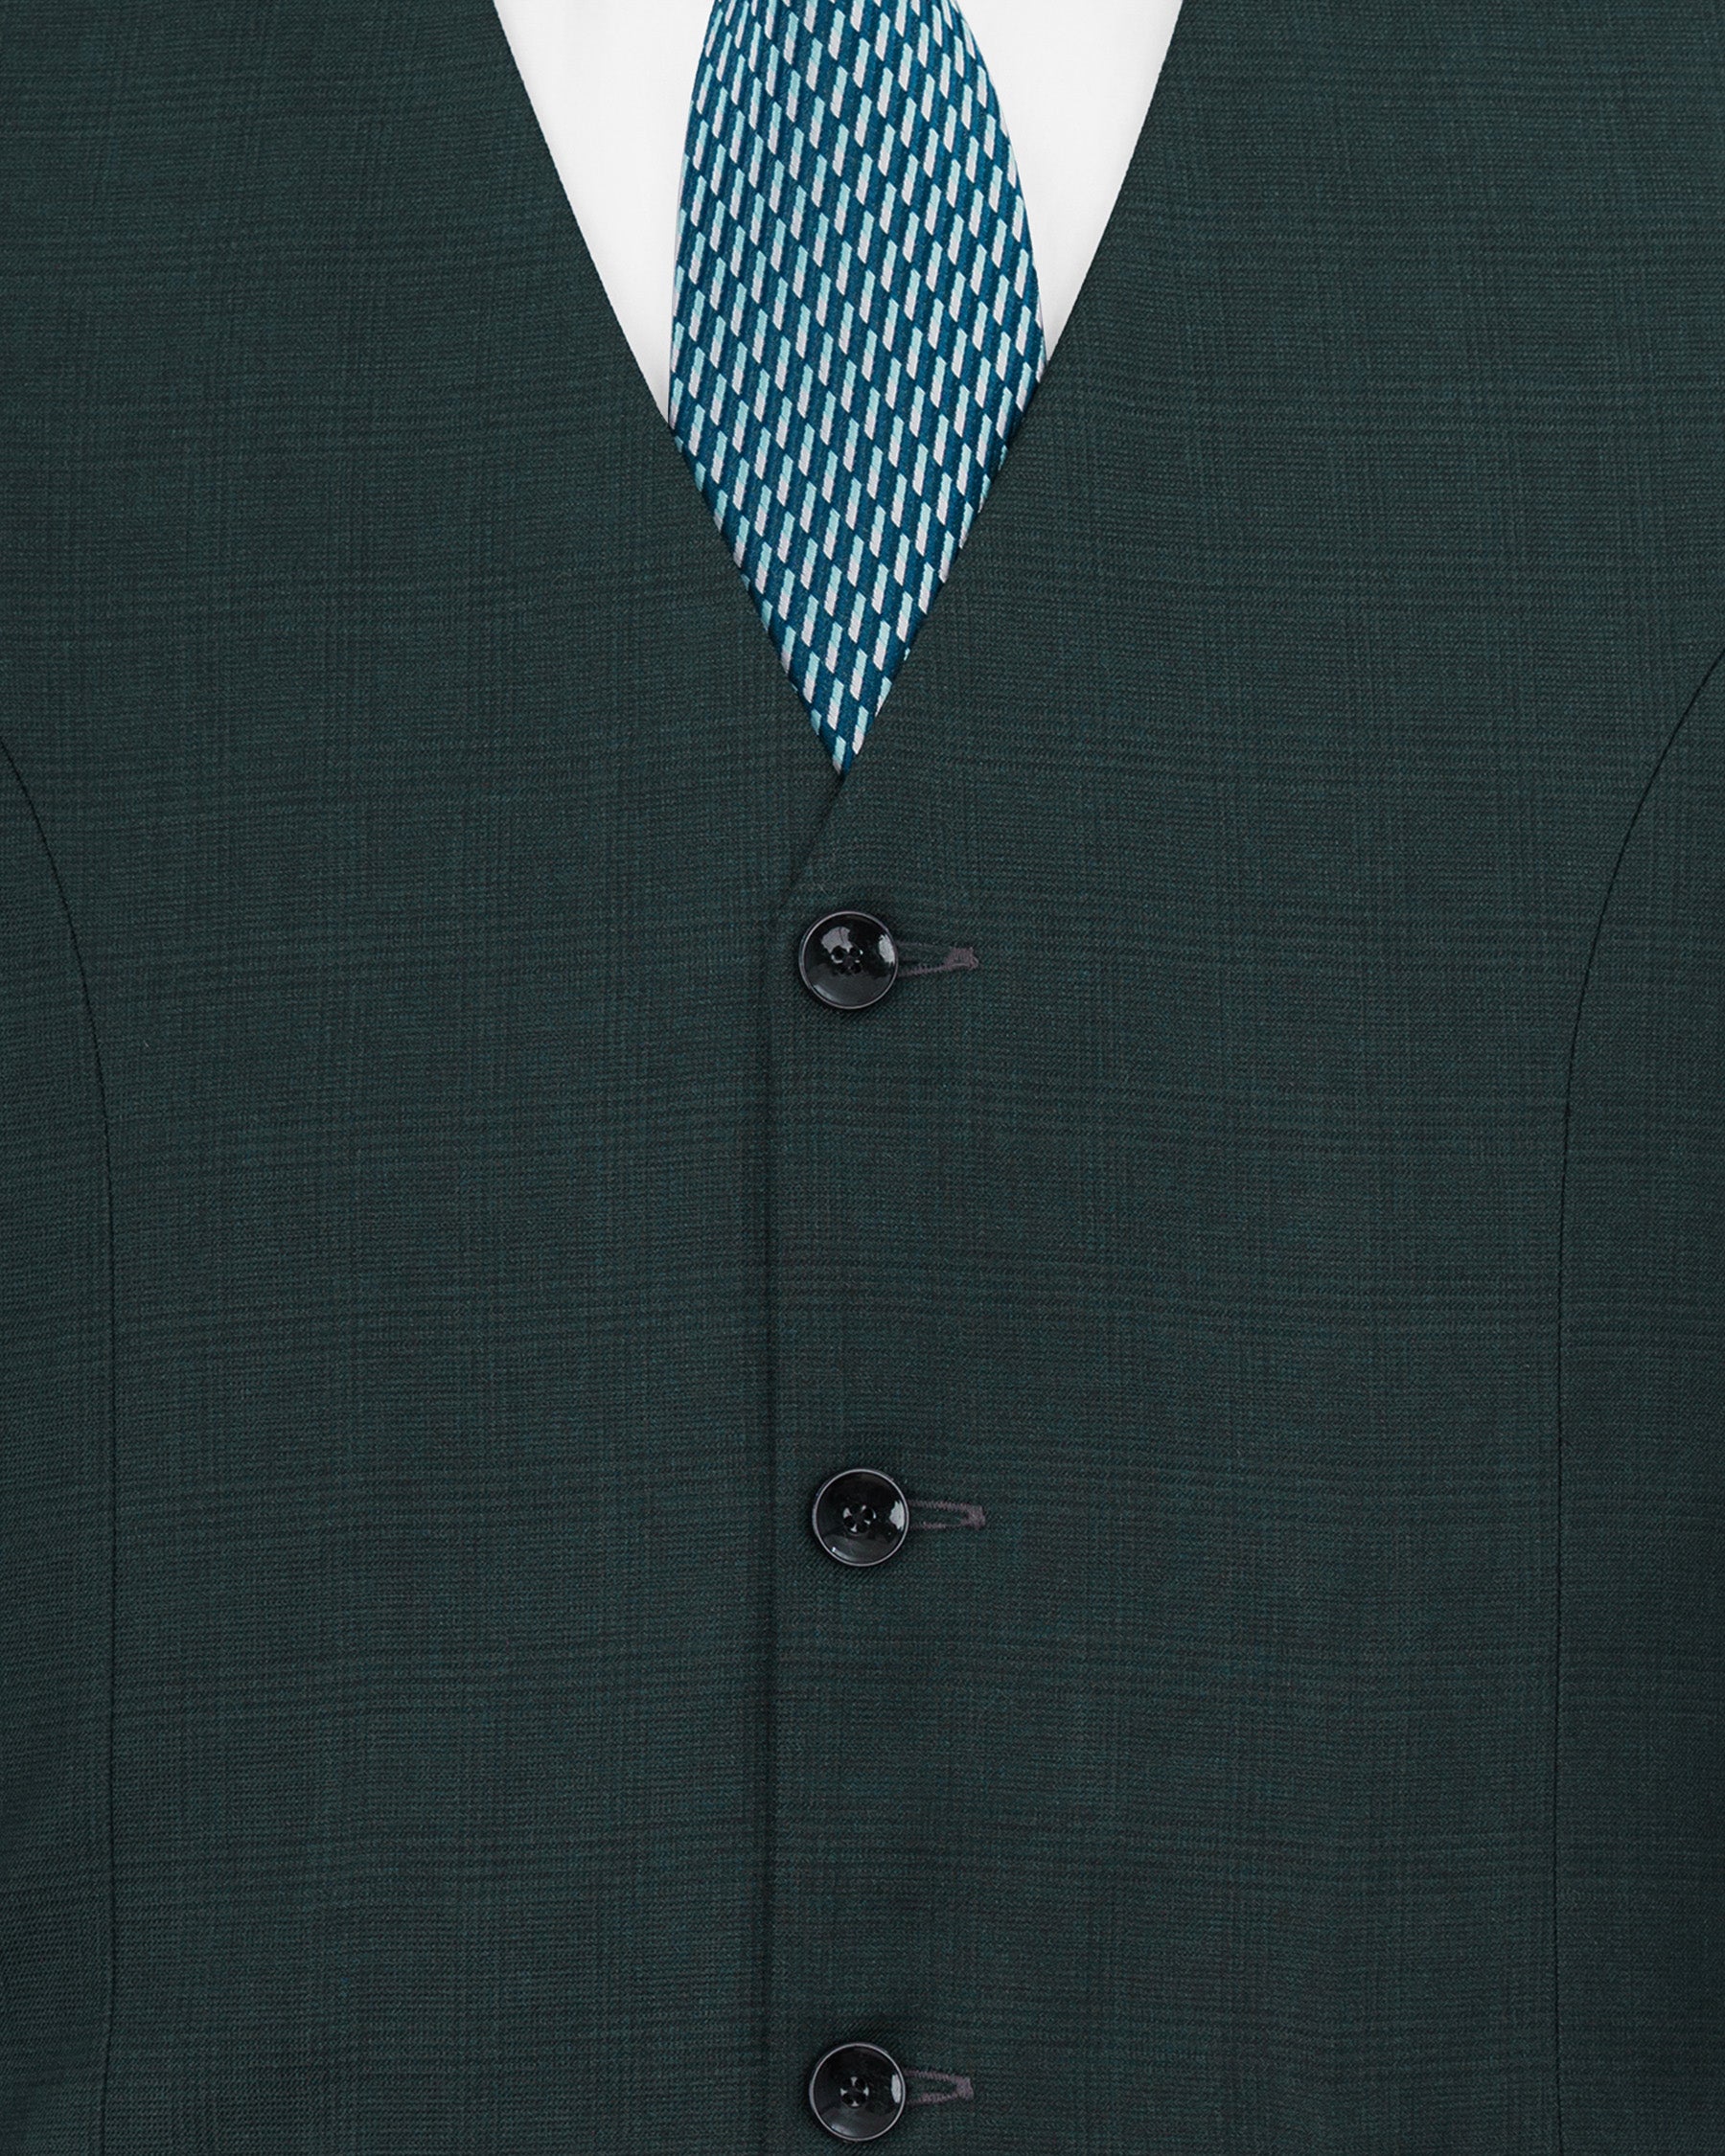 Cape Cod Green Subtle Plaid Double Breasted Suit ST1747-DB-36, ST1747-DB-38, ST1747-DB-40, ST1747-DB-42, ST1747-DB-44, ST1747-DB-46, ST1747-DB-48, ST1747-DB-50, ST1747-DB-52, ST1747-DB-54, ST1747-DB-56, ST1747-DB-58, ST1747-DB-60